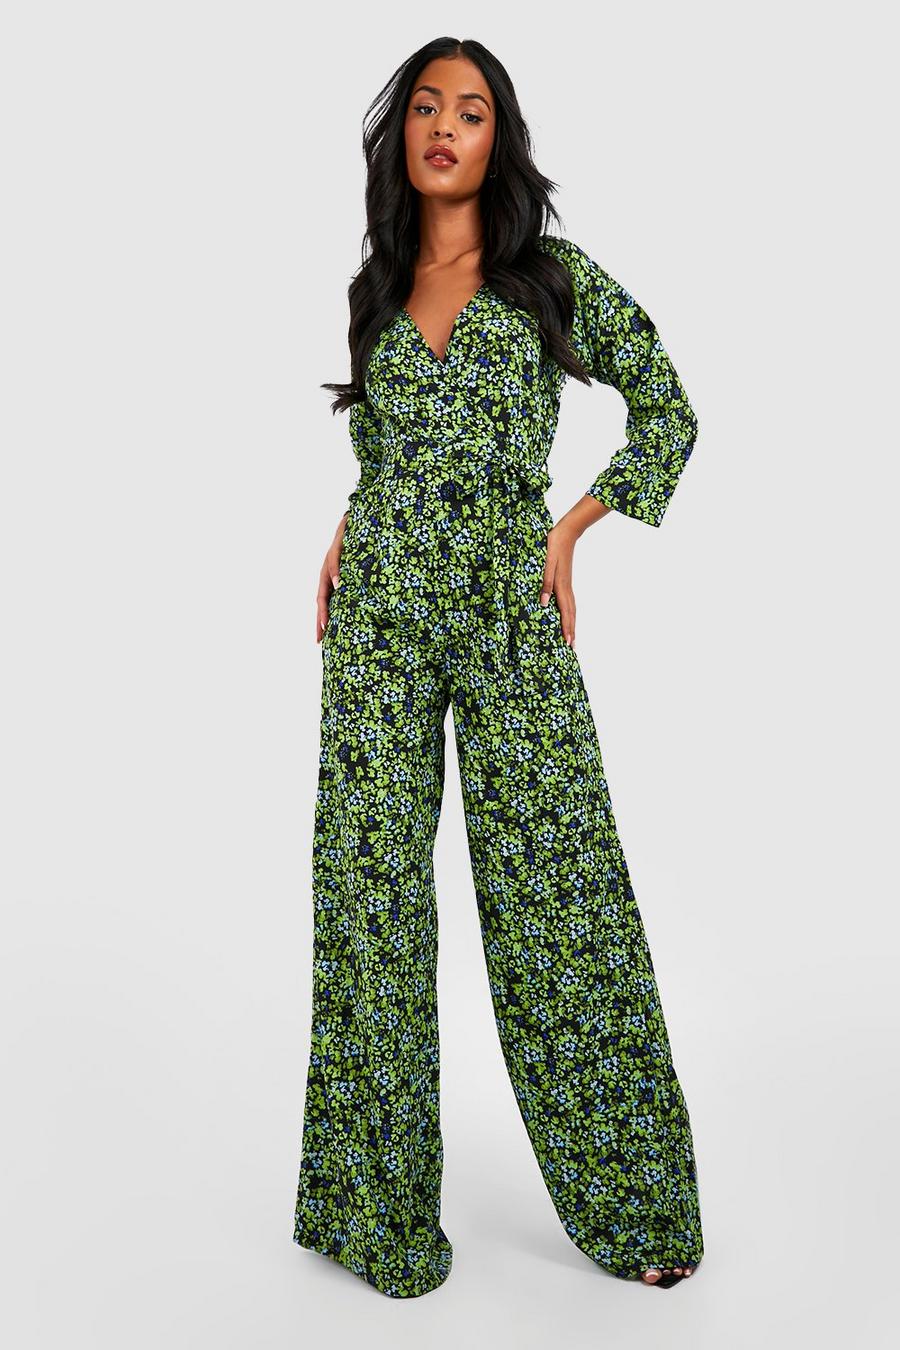 Style Dome Women Jumpsuits Floral Print Long Sleeve Playsuit Summer Long Pants Romper Loose Waist Casual Dungaree Wide Leg Jumpsuits with Pockets 